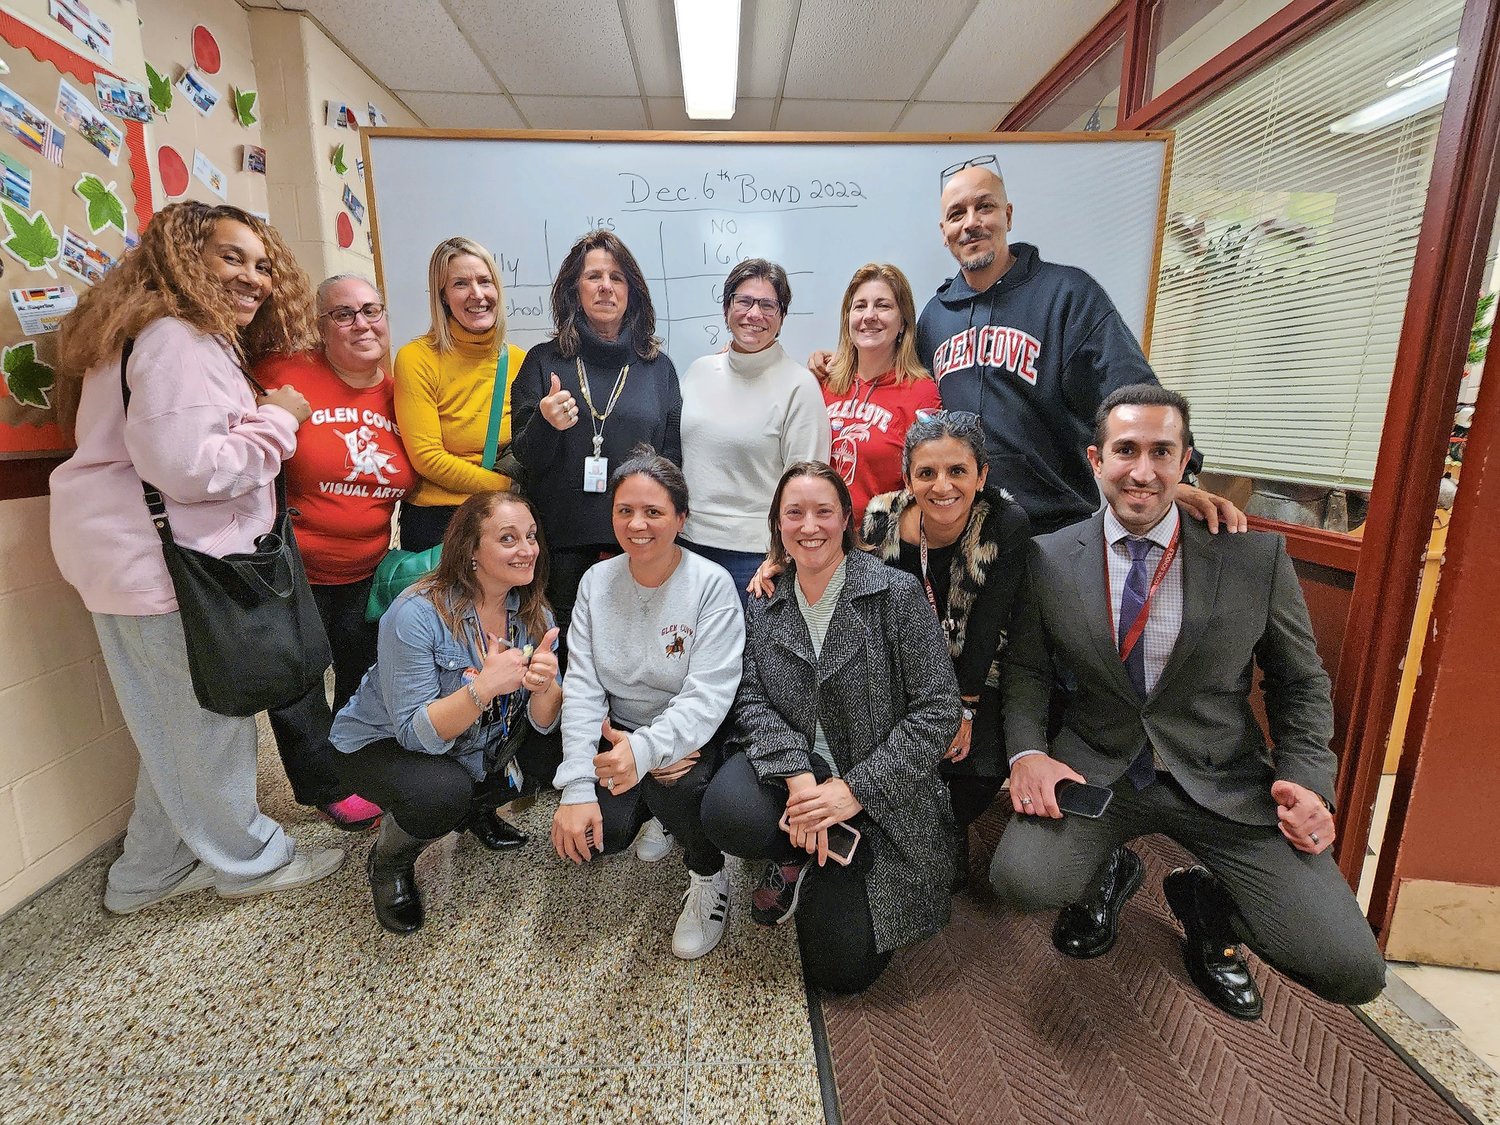 After tears of joy and many hugs, education board members and school officials gathered to celebrate the results of the 2022 bond referendum, which will provide nearly $31 million to the Glen Cove City School District.